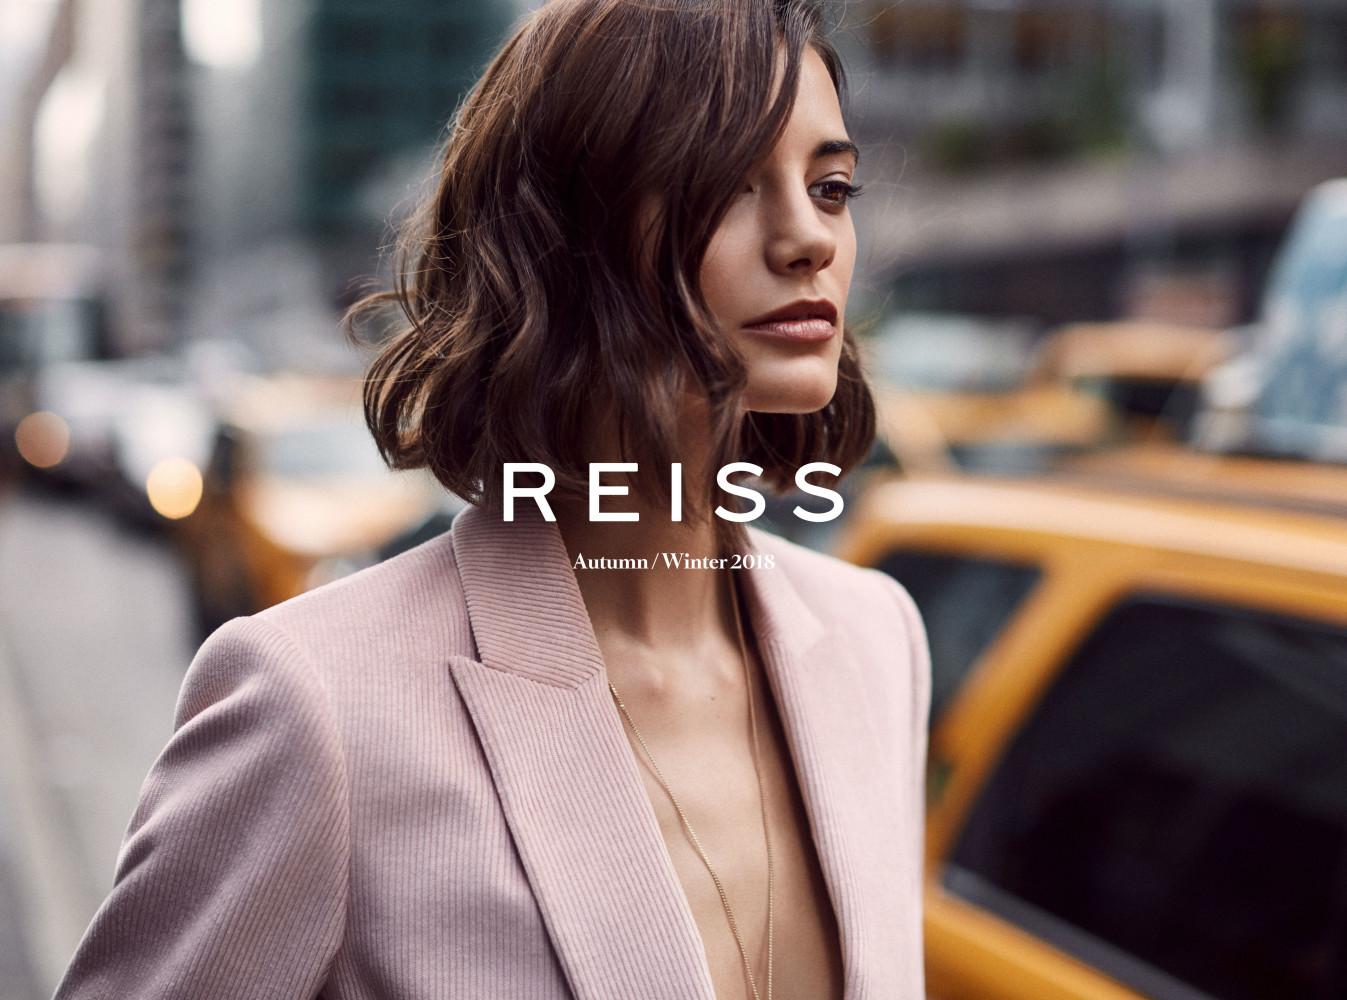 SPOTTED: ANJA IS SOFT AND STRUCTURED FOR REISS FALL CAMPAIGN | Spot 6  Management Inc. | Toronto Modeling Agency Specializing in High Fashion  Advertising, Magazine Editorials, Catalogues, Commercial Print, TV  Commercials and Runway